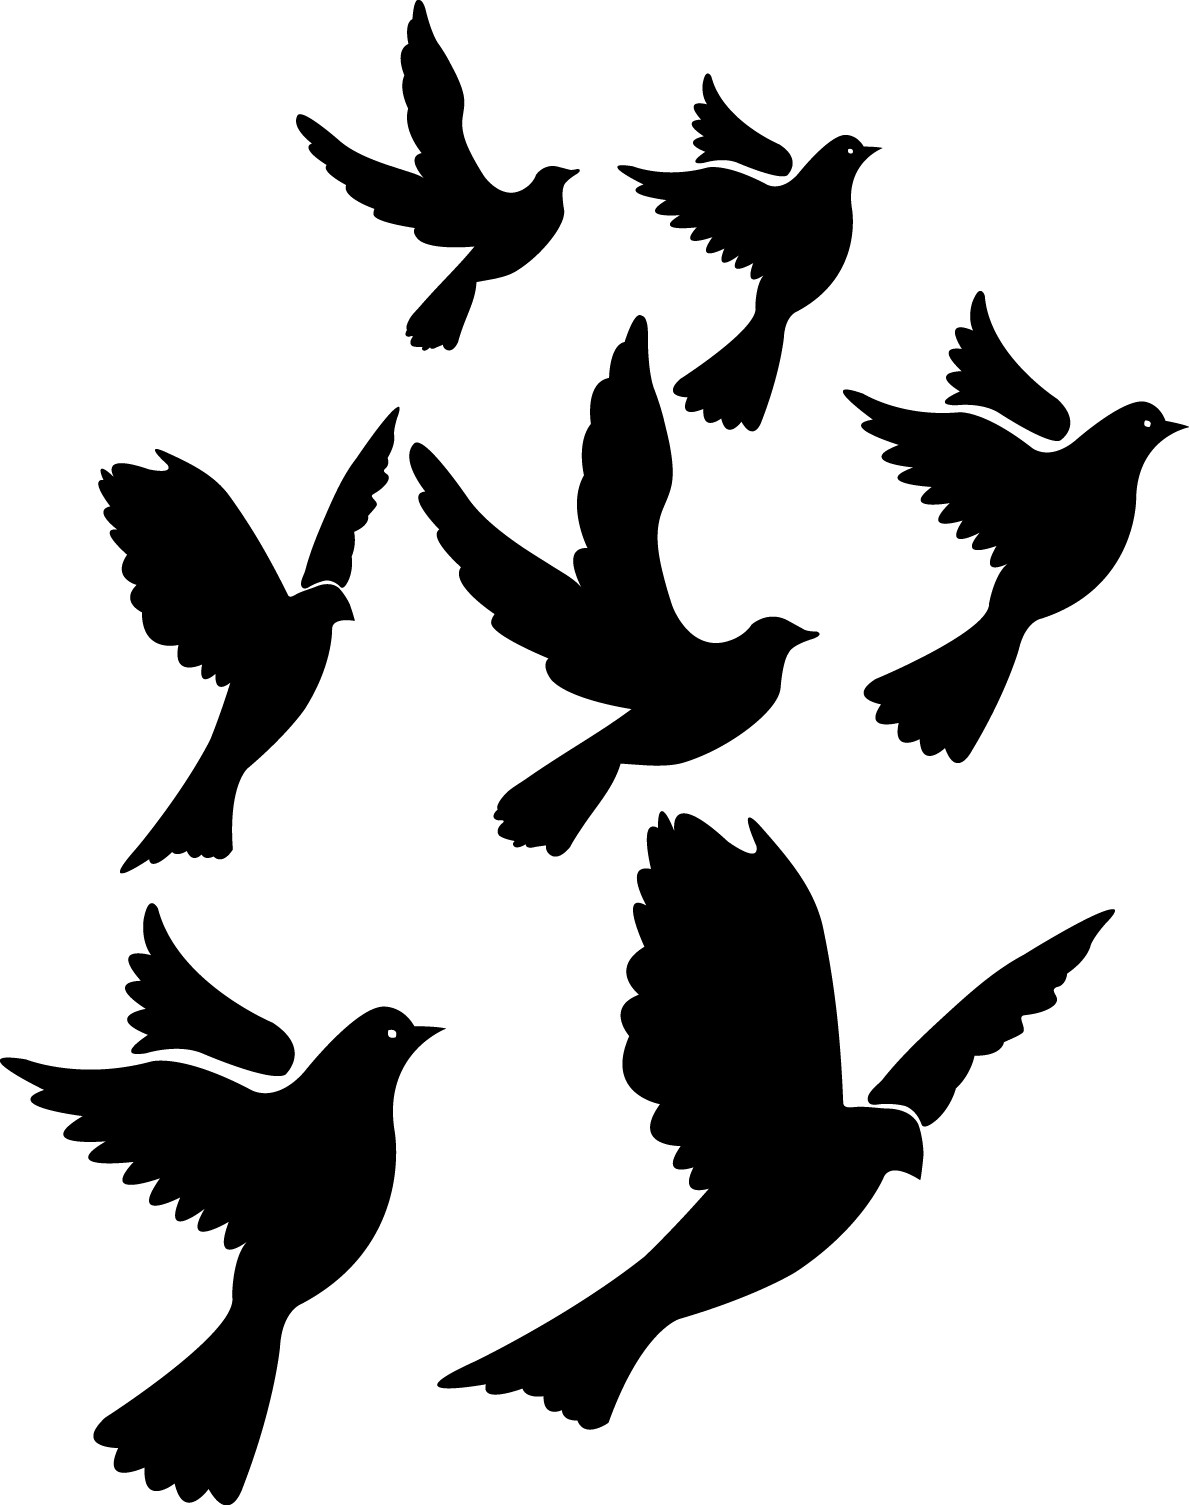 Flying pigeons silhouette